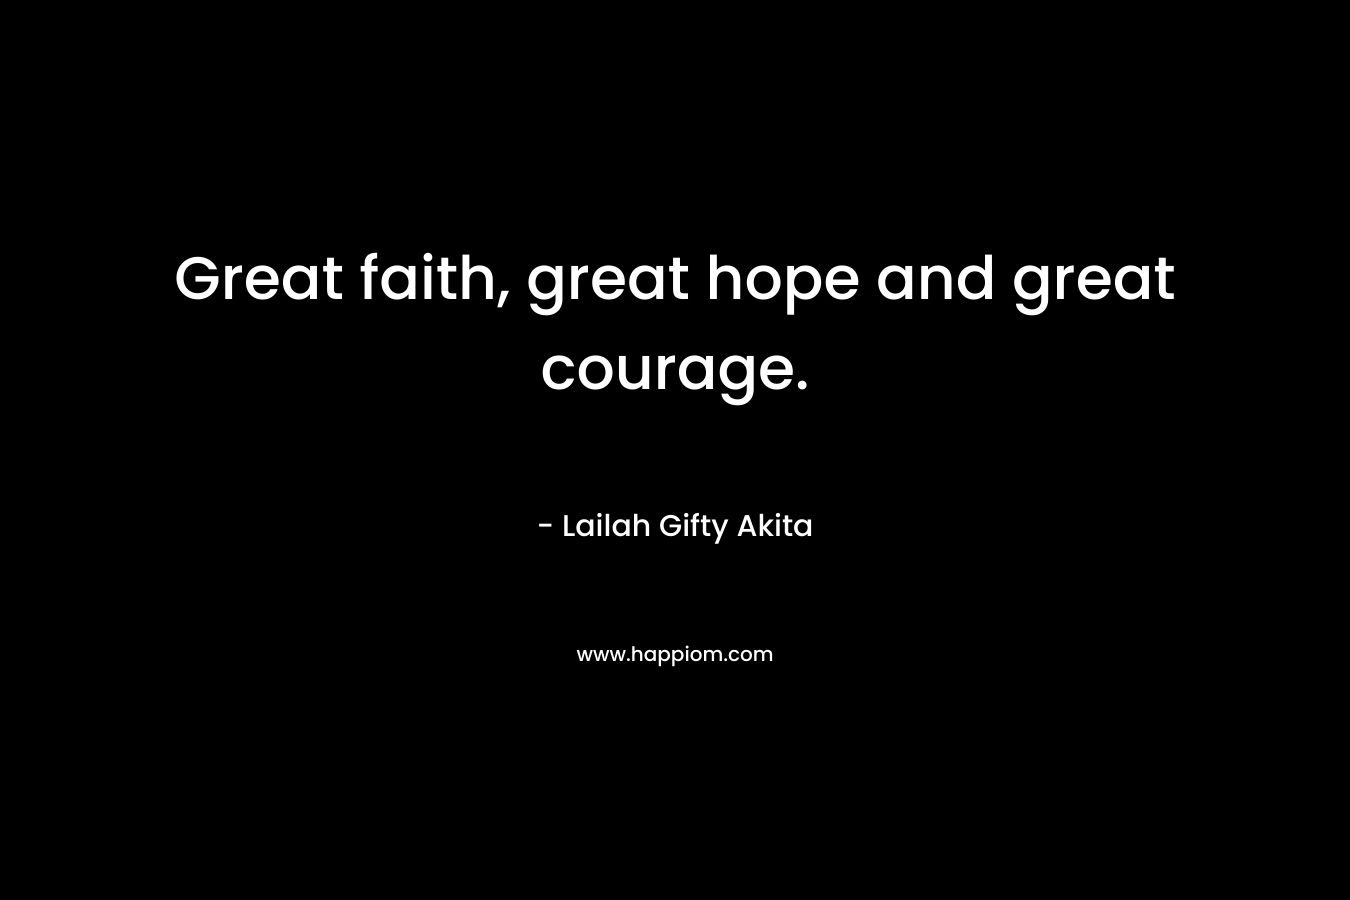 Great faith, great hope and great courage.